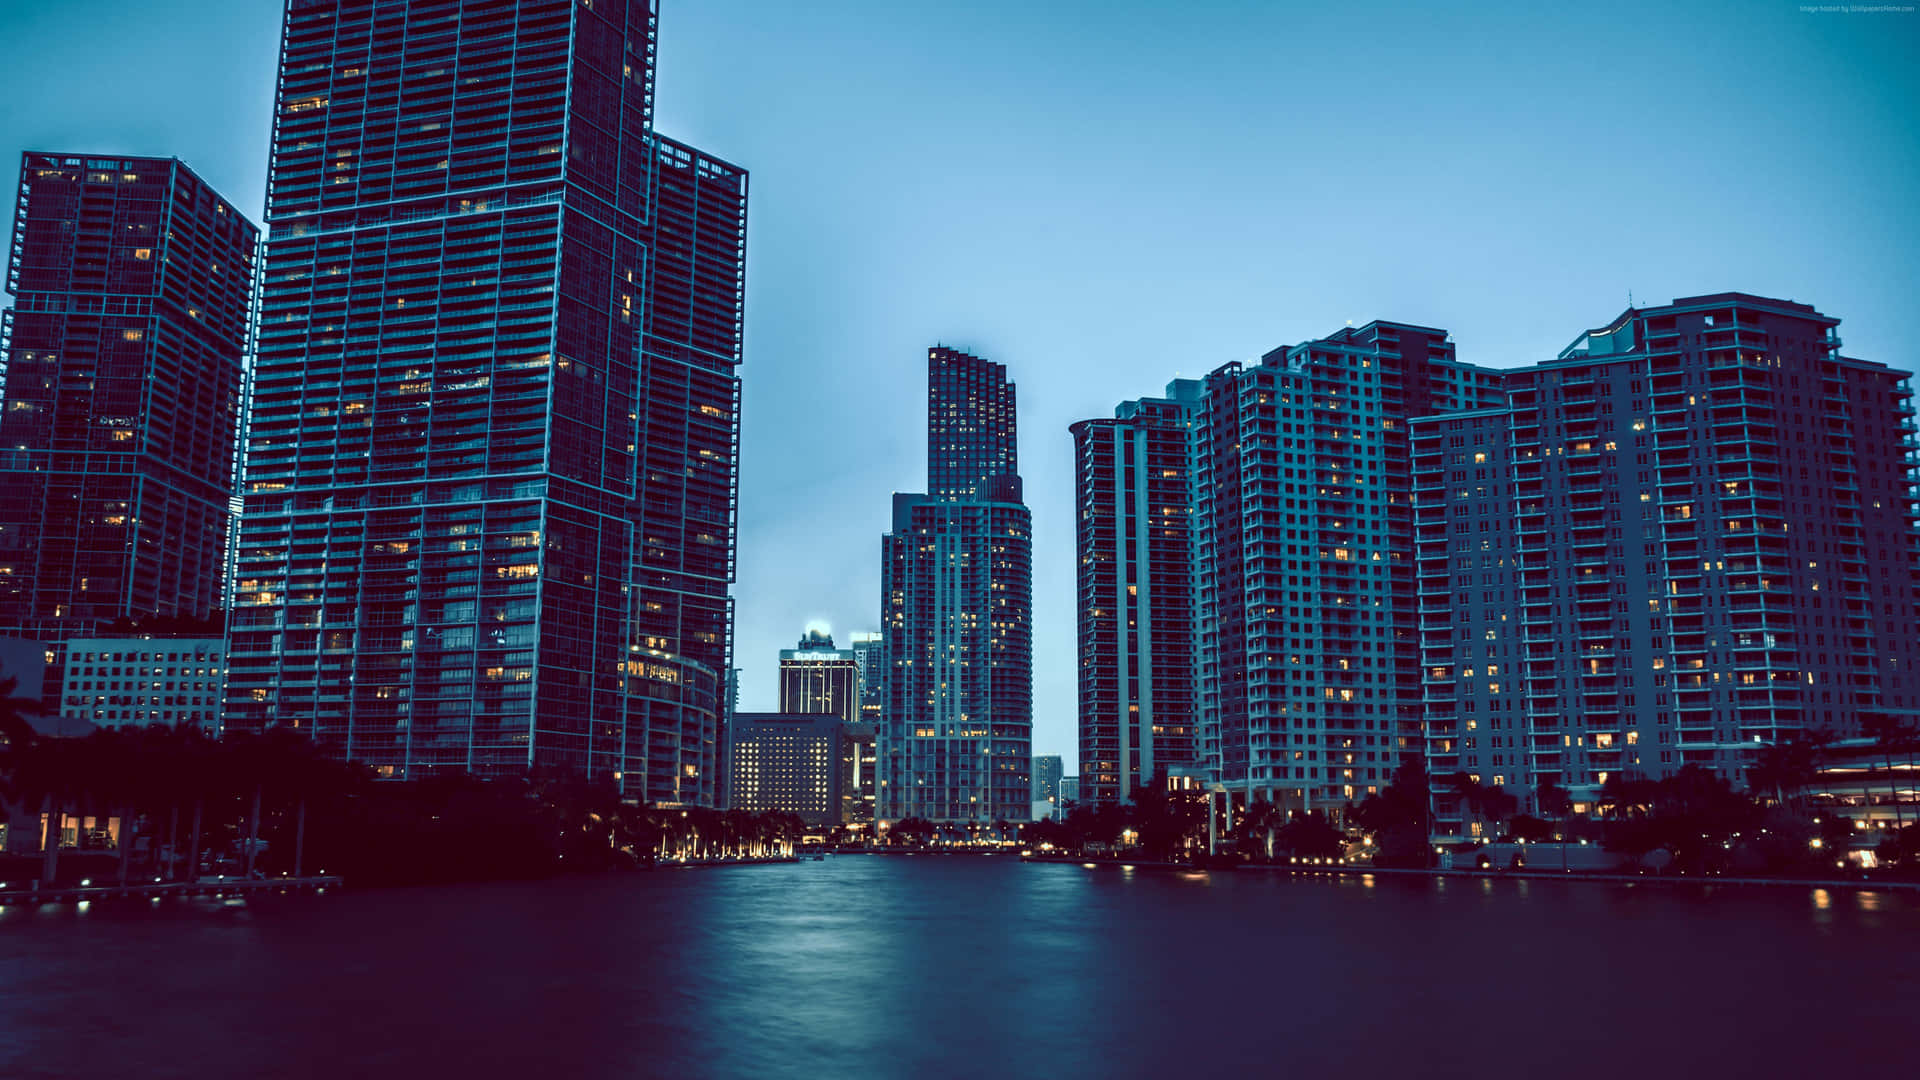 Enjoy the stunning view of Miami from 4K resolution Wallpaper